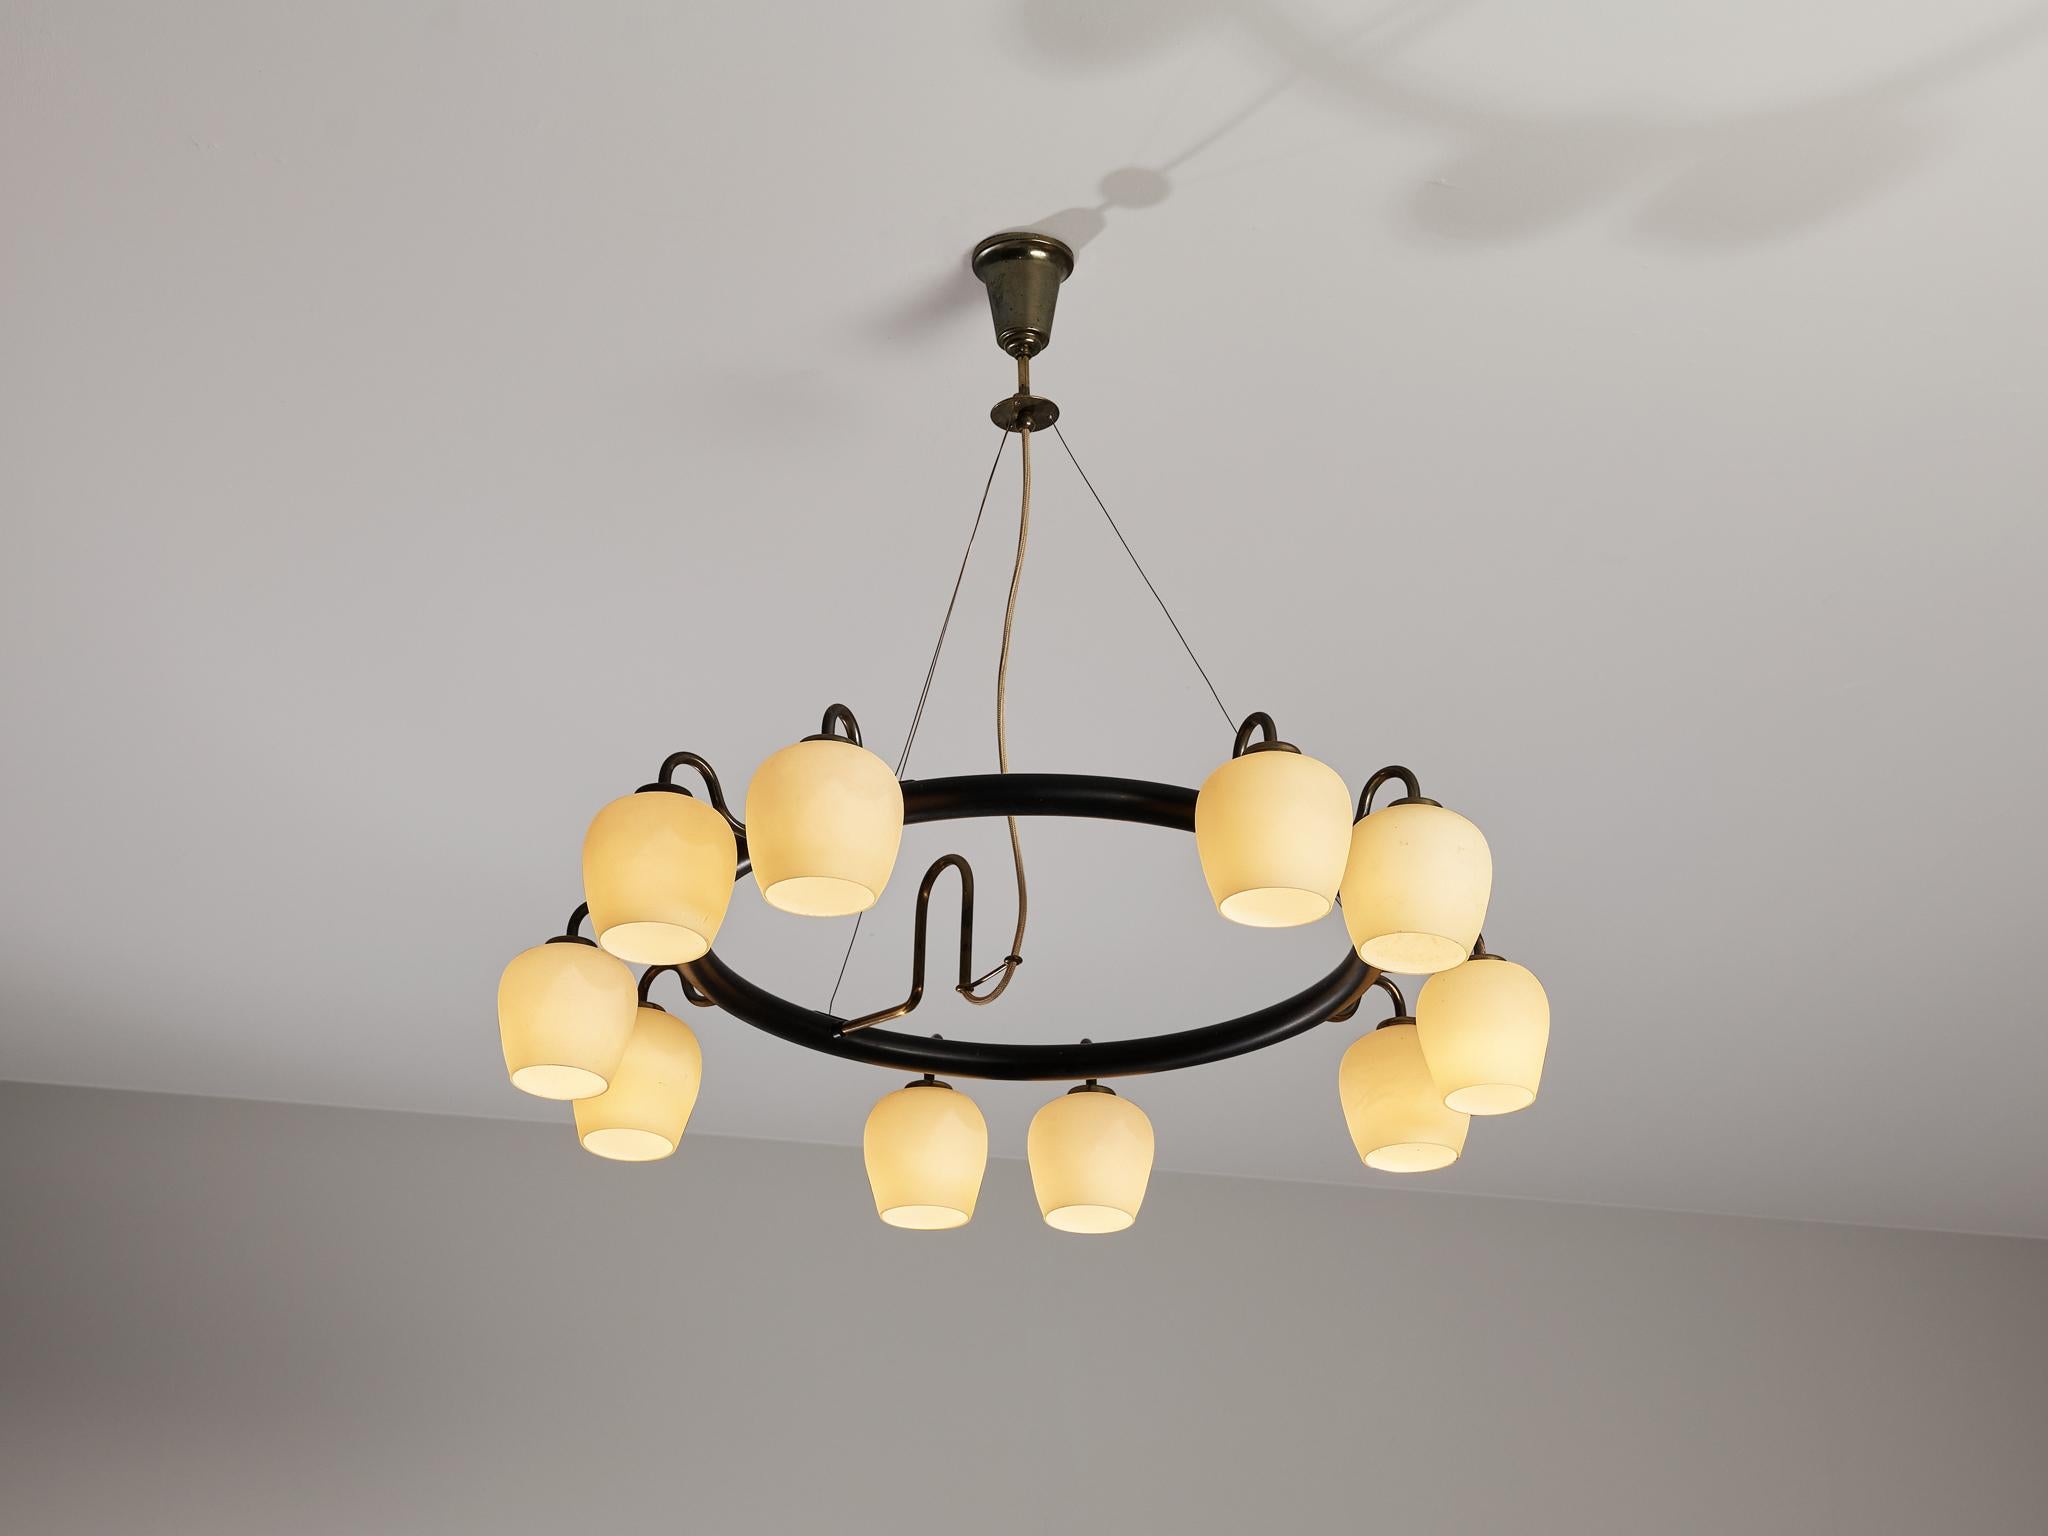 Vilhelm Lauritzen for Fog & Mørup, chandelier, opaline glass, brass, coated brass, Denmark, production 1945 to 1955. 

This very rare chandelier was created by the renowned Danish Modern architect Vilhelm Theodor Lauritzen for Fog & Mørup during the